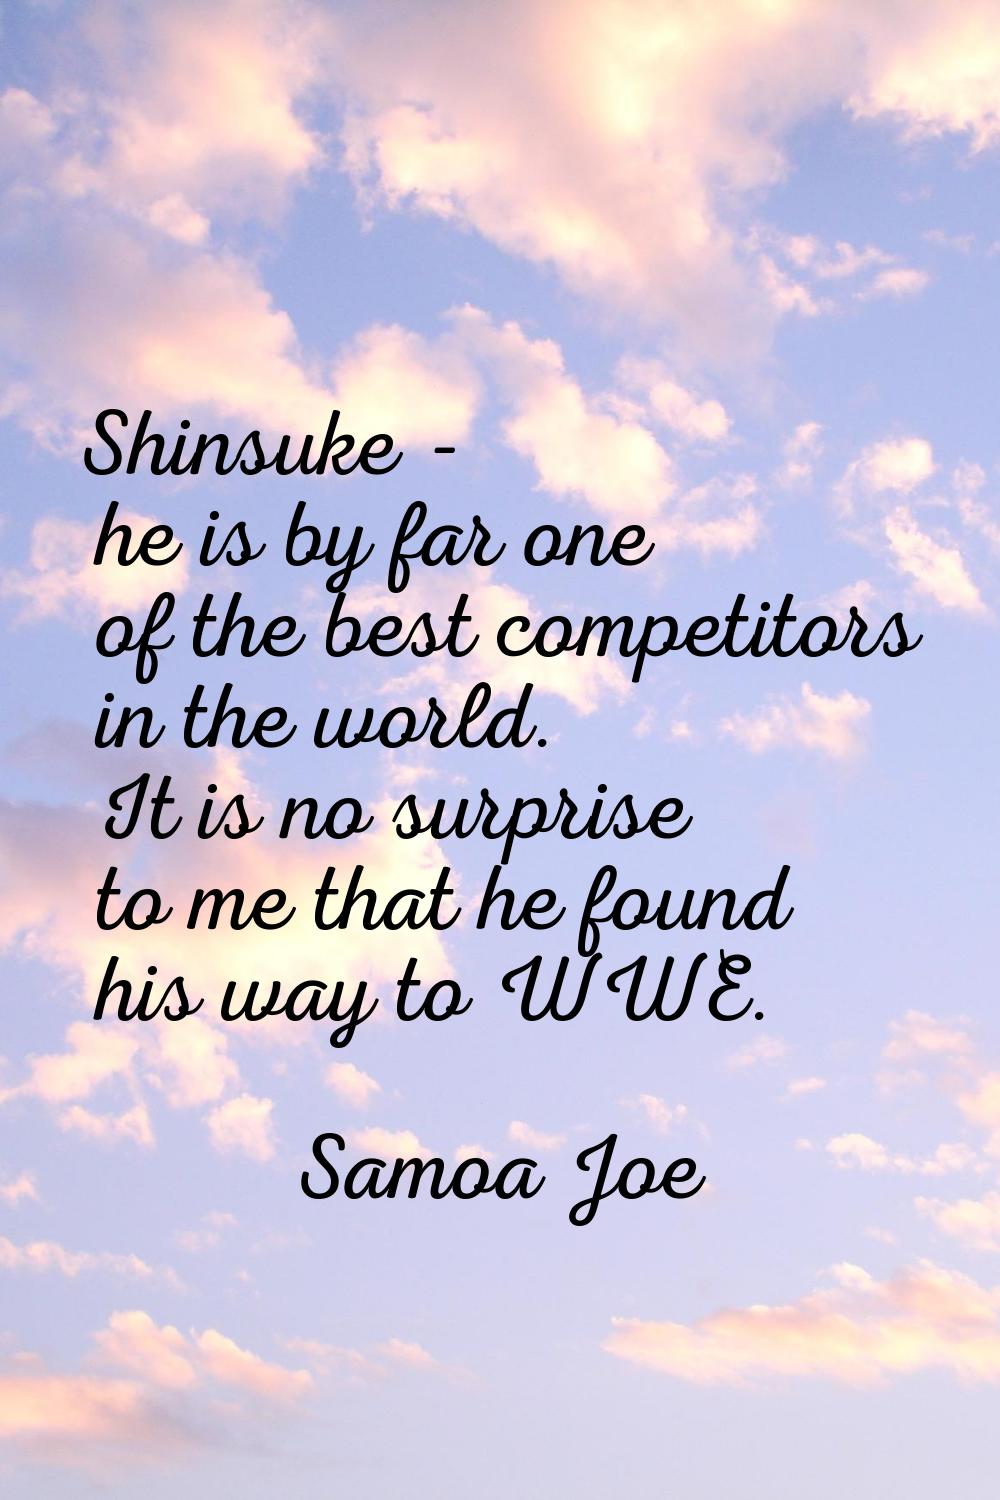 Shinsuke - he is by far one of the best competitors in the world. It is no surprise to me that he f